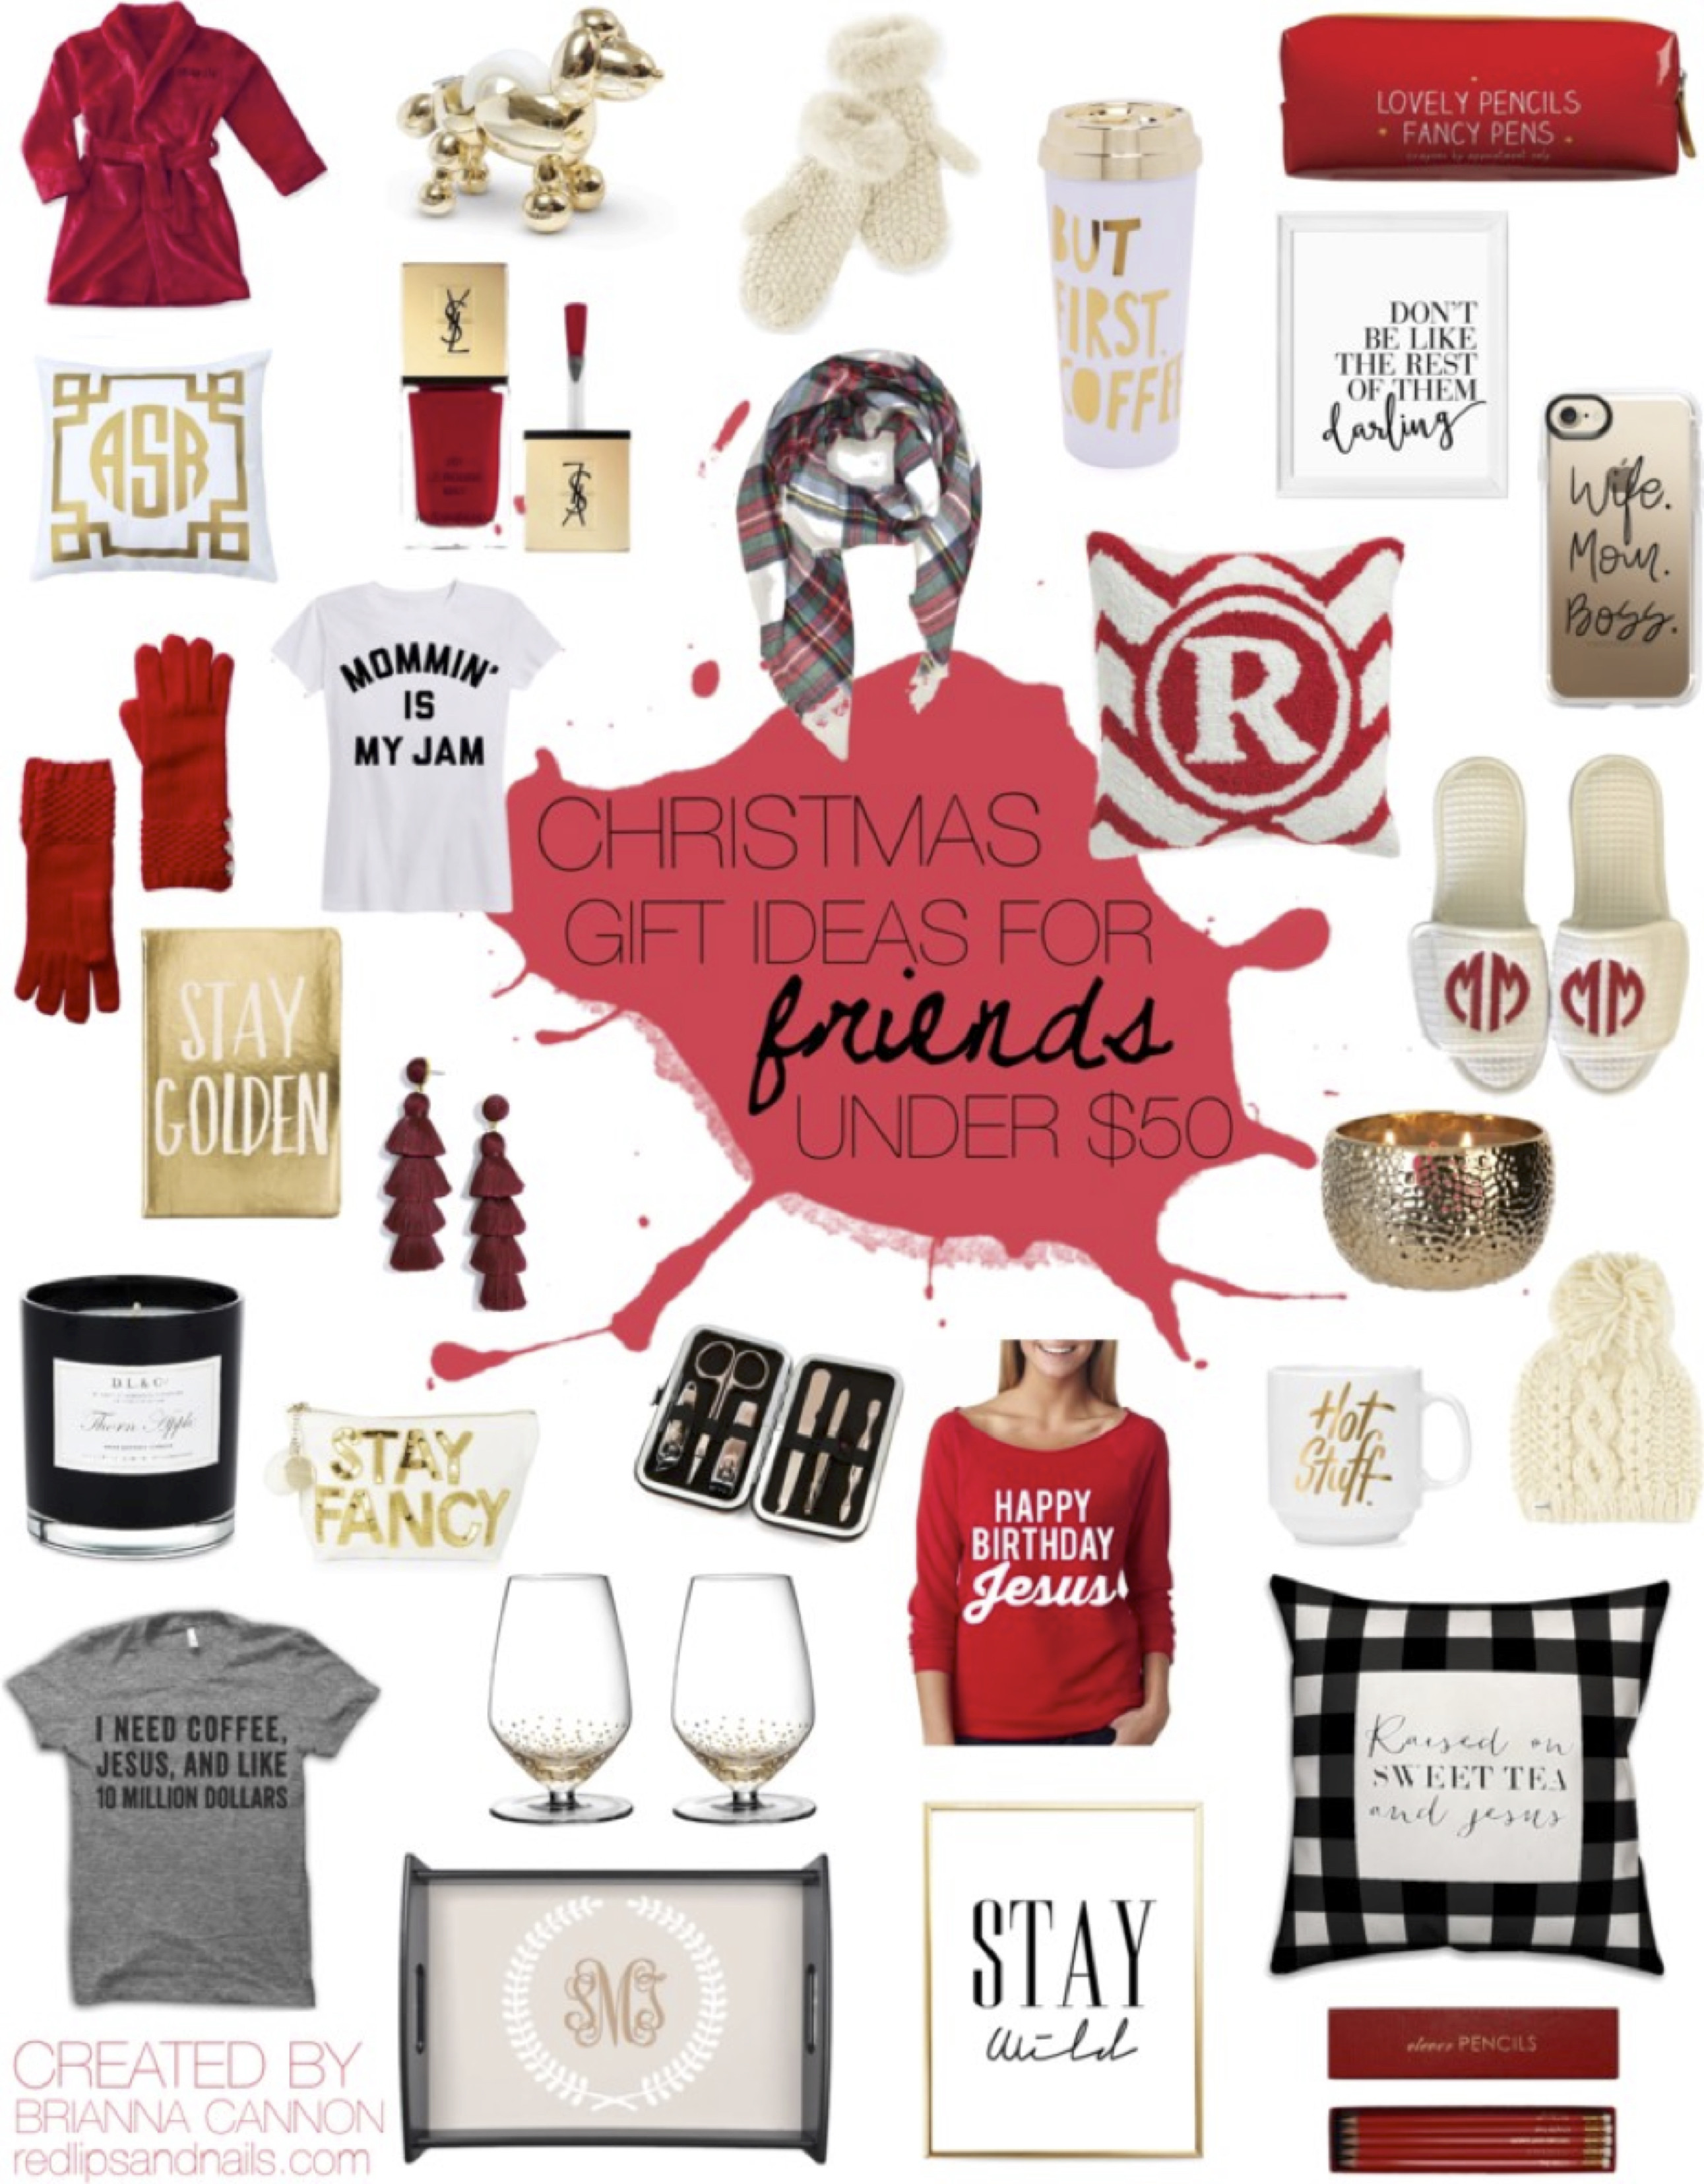 Group Christmas Gift Ideas
 Christmas Gift Ideas for Friends – All Under $50 – Red